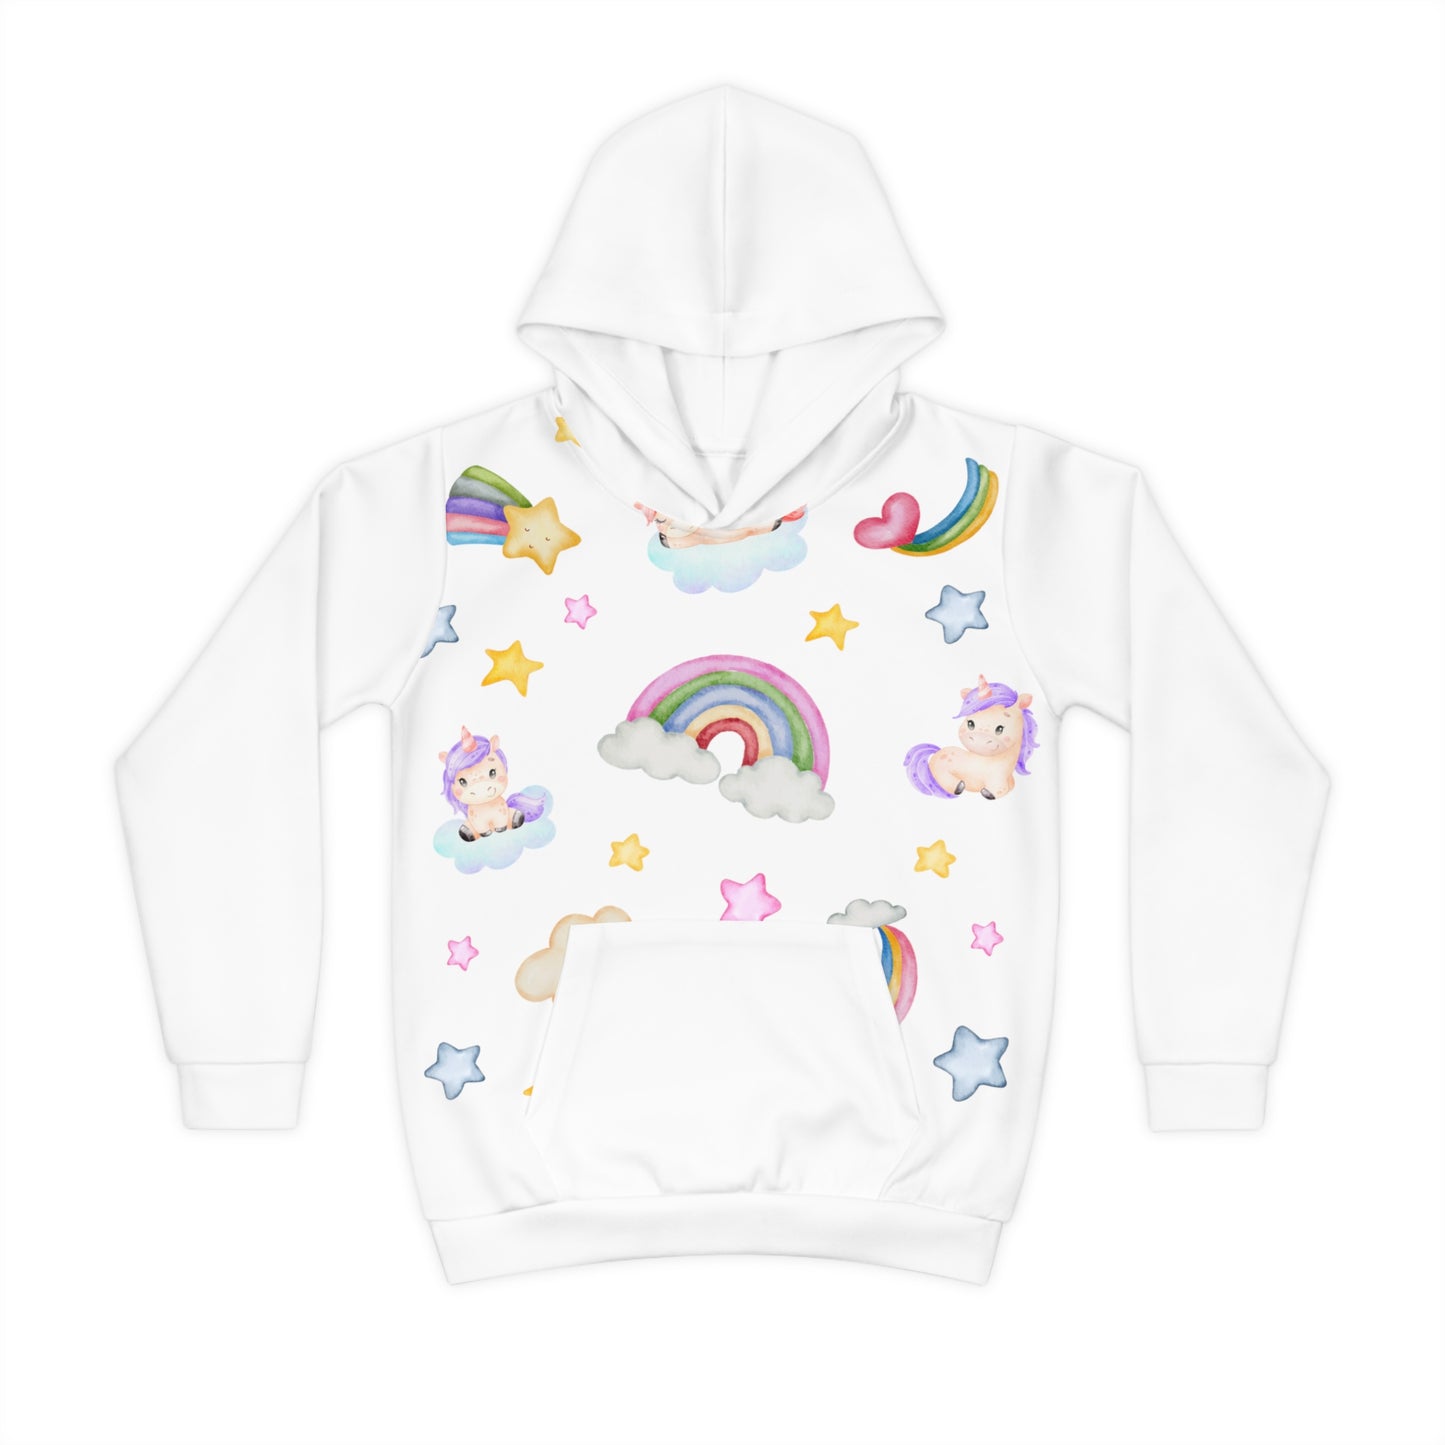 Adorable Children's Sweatshirts with Whimsical Baby and Kids Playing Elements – Elevate Their Style, Spark Their Joy!"